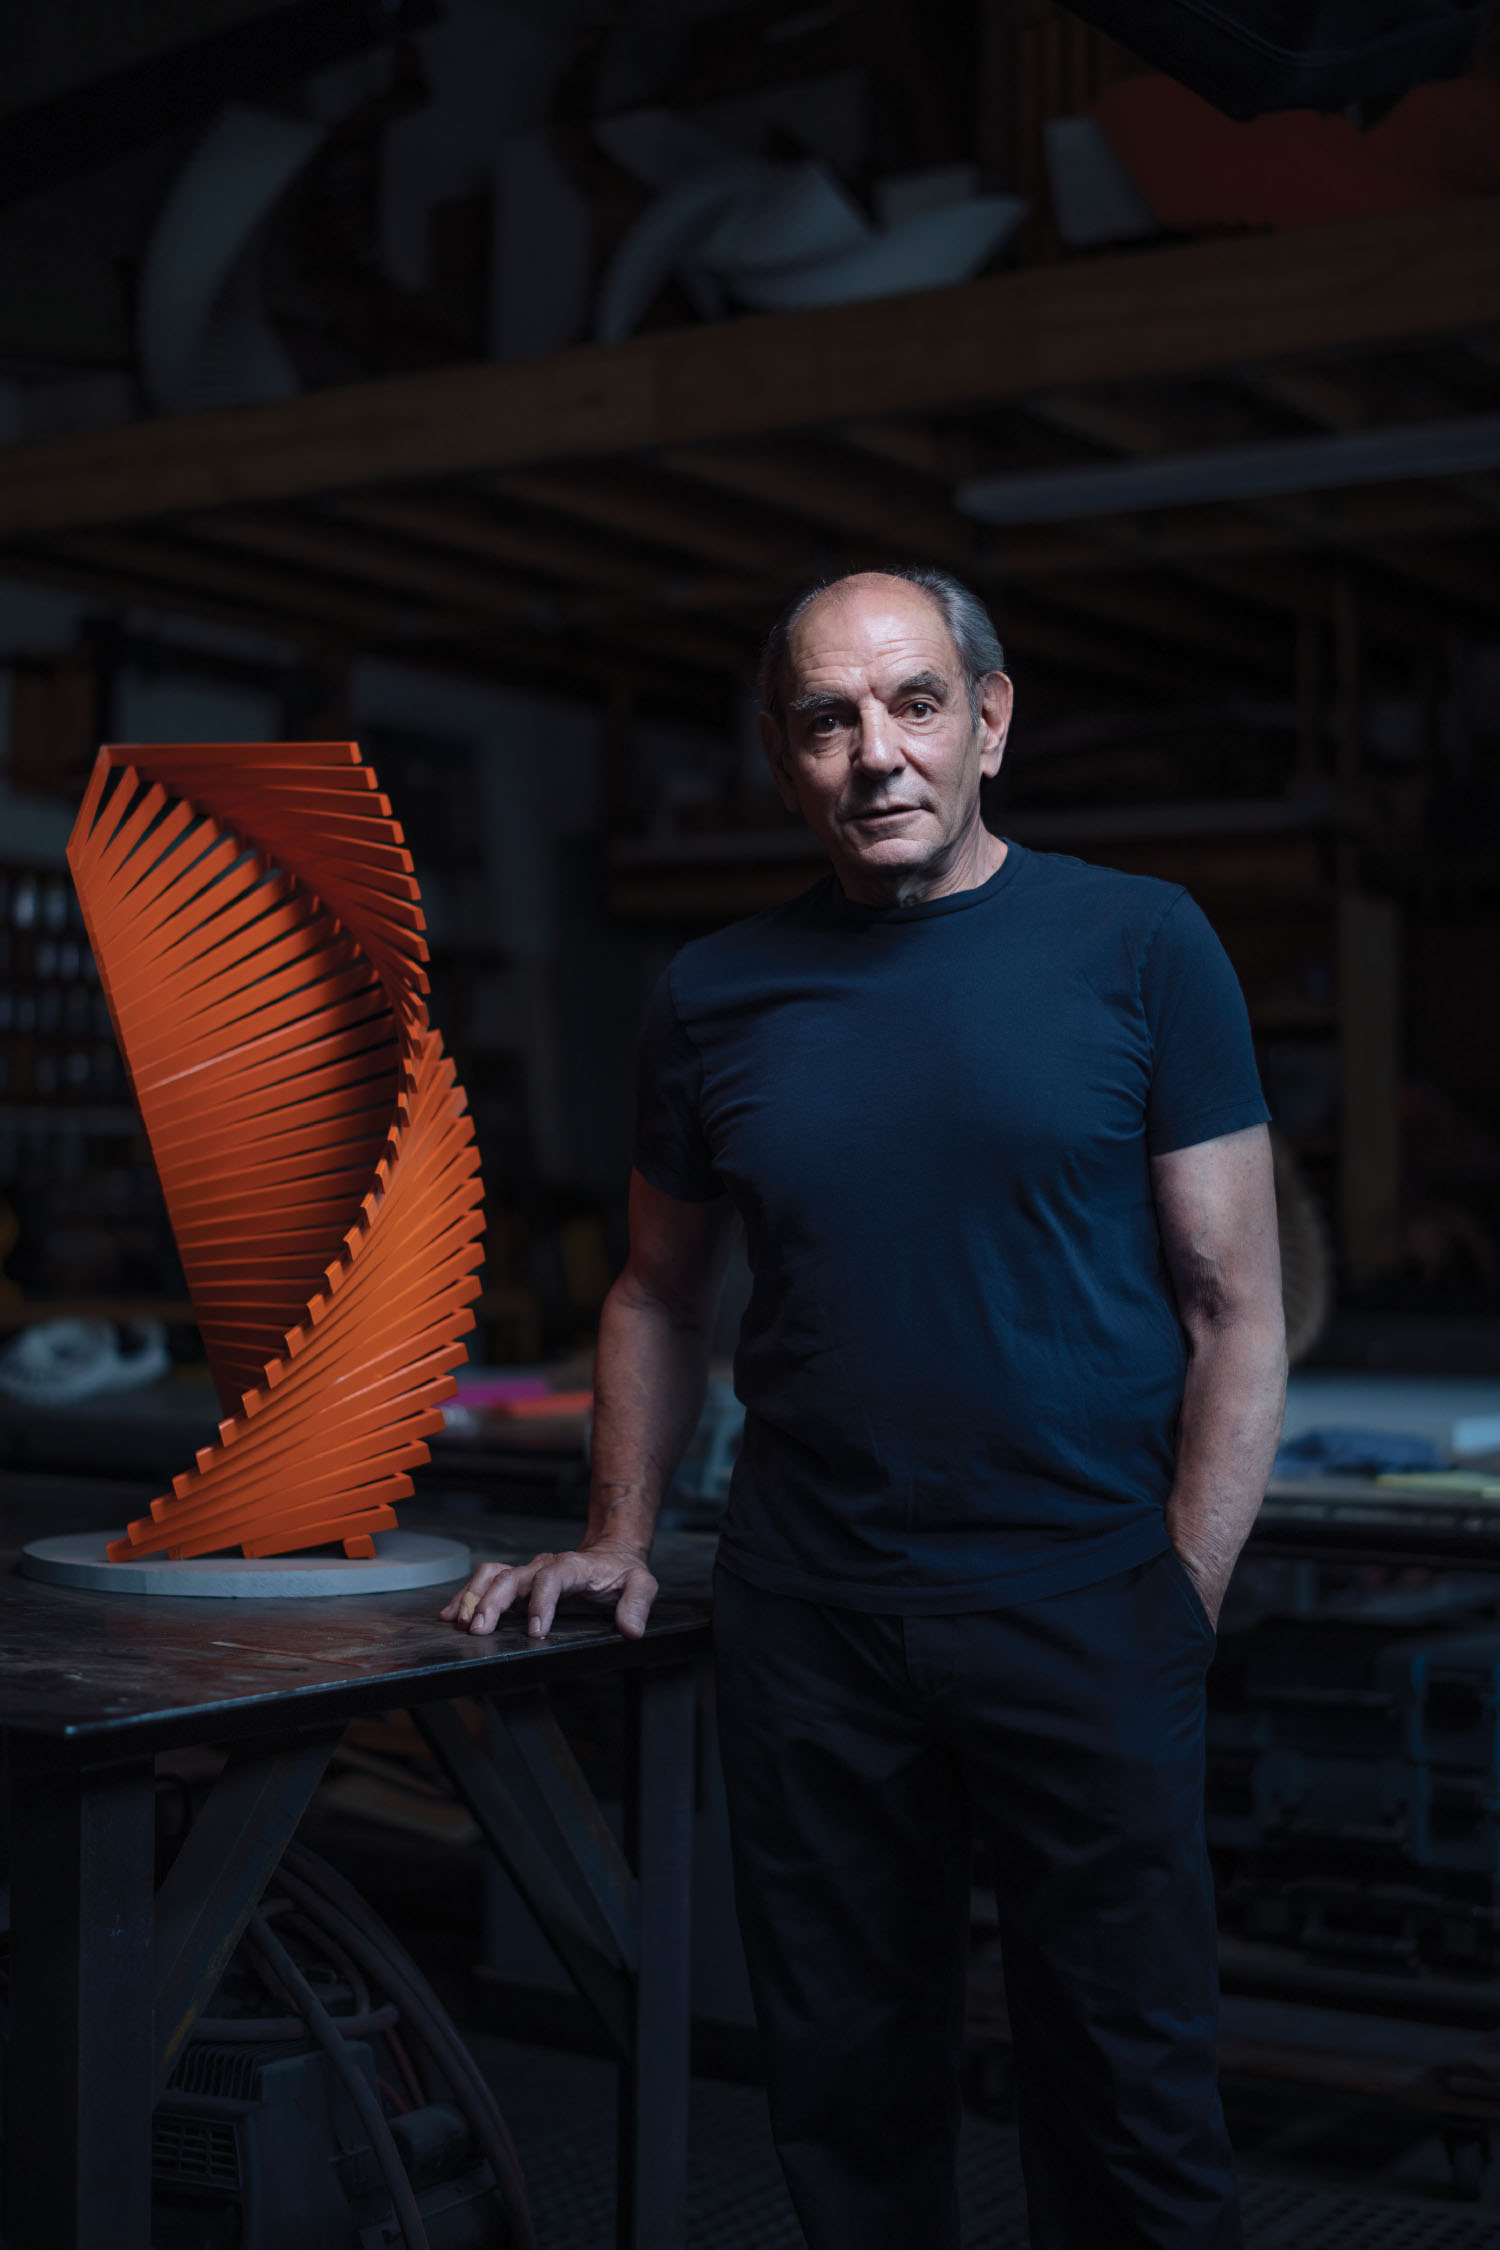 Sculptor Uses Geometry to Defy the Laws of Physics